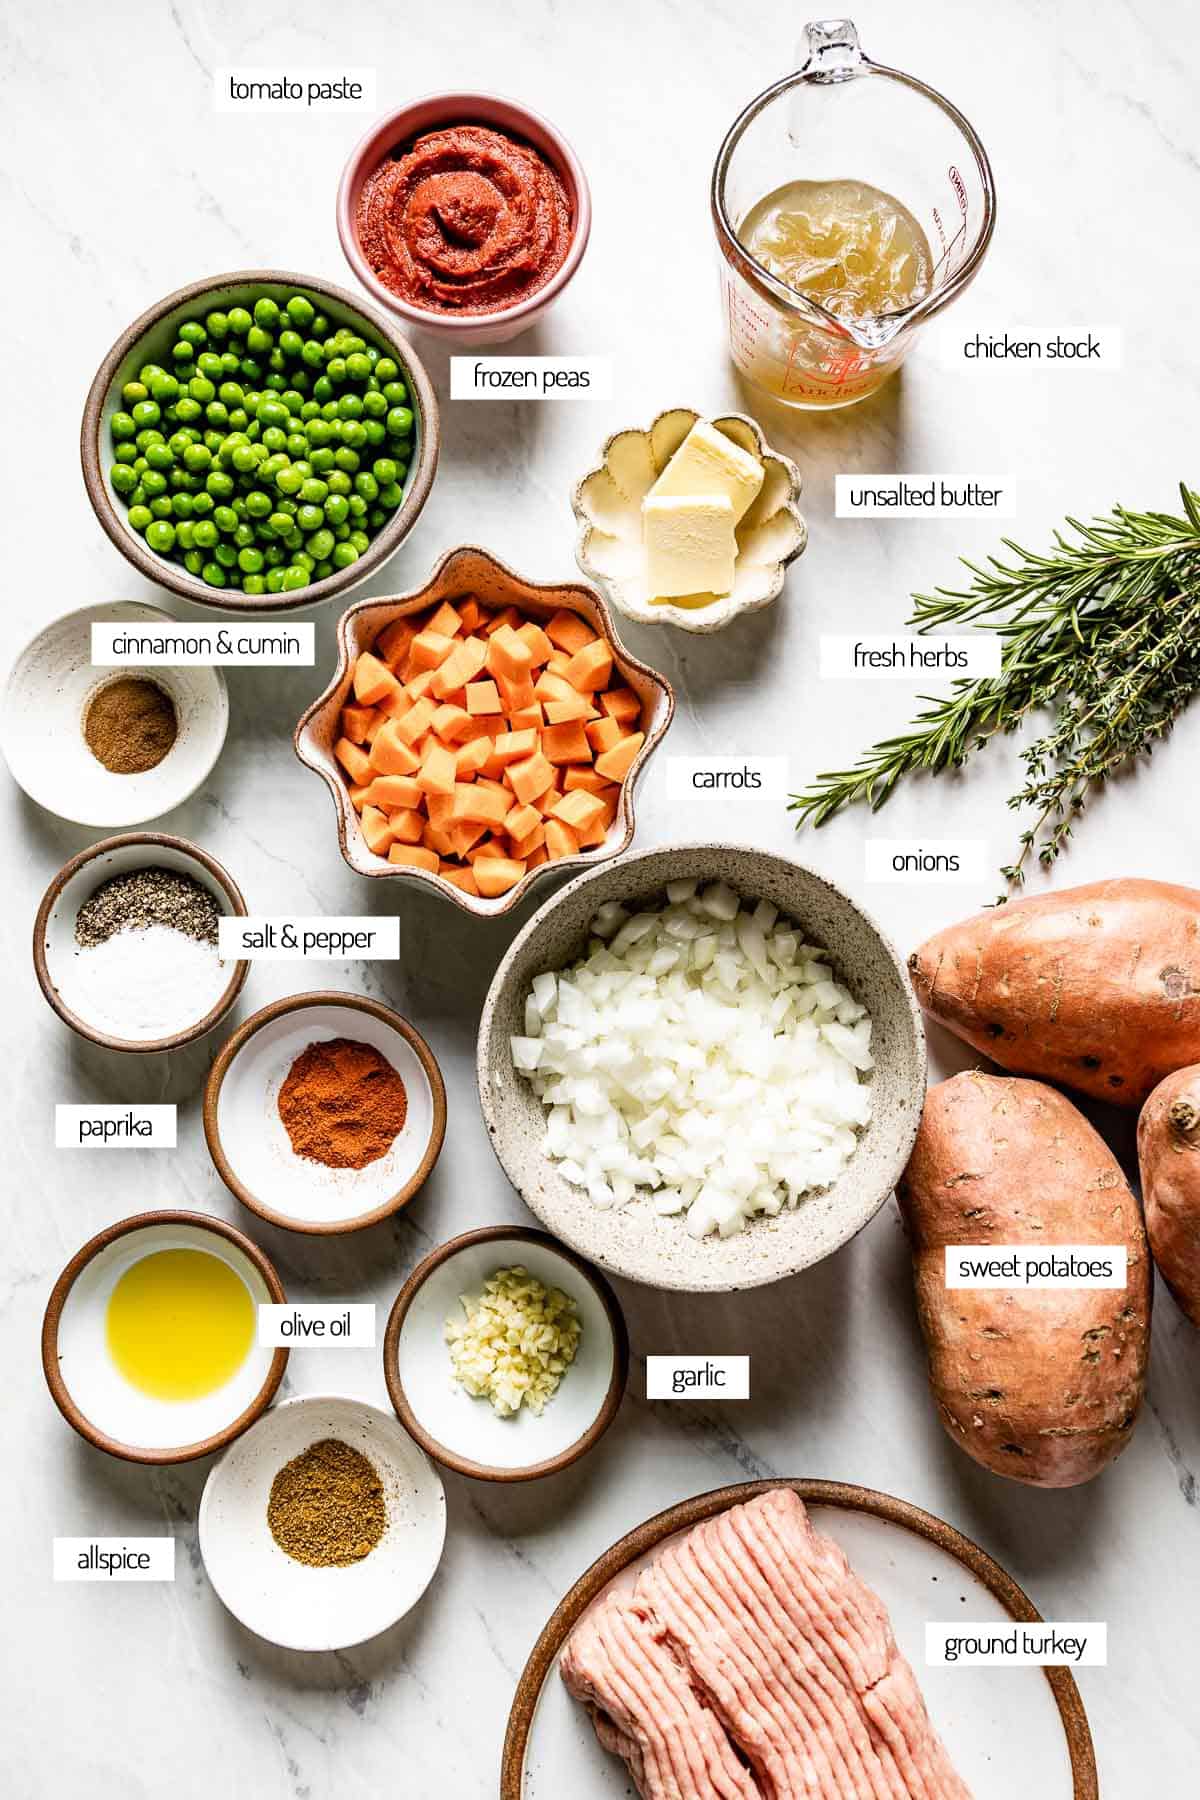 Ingredients for a turkey pie with sweet potatoes from the top view.